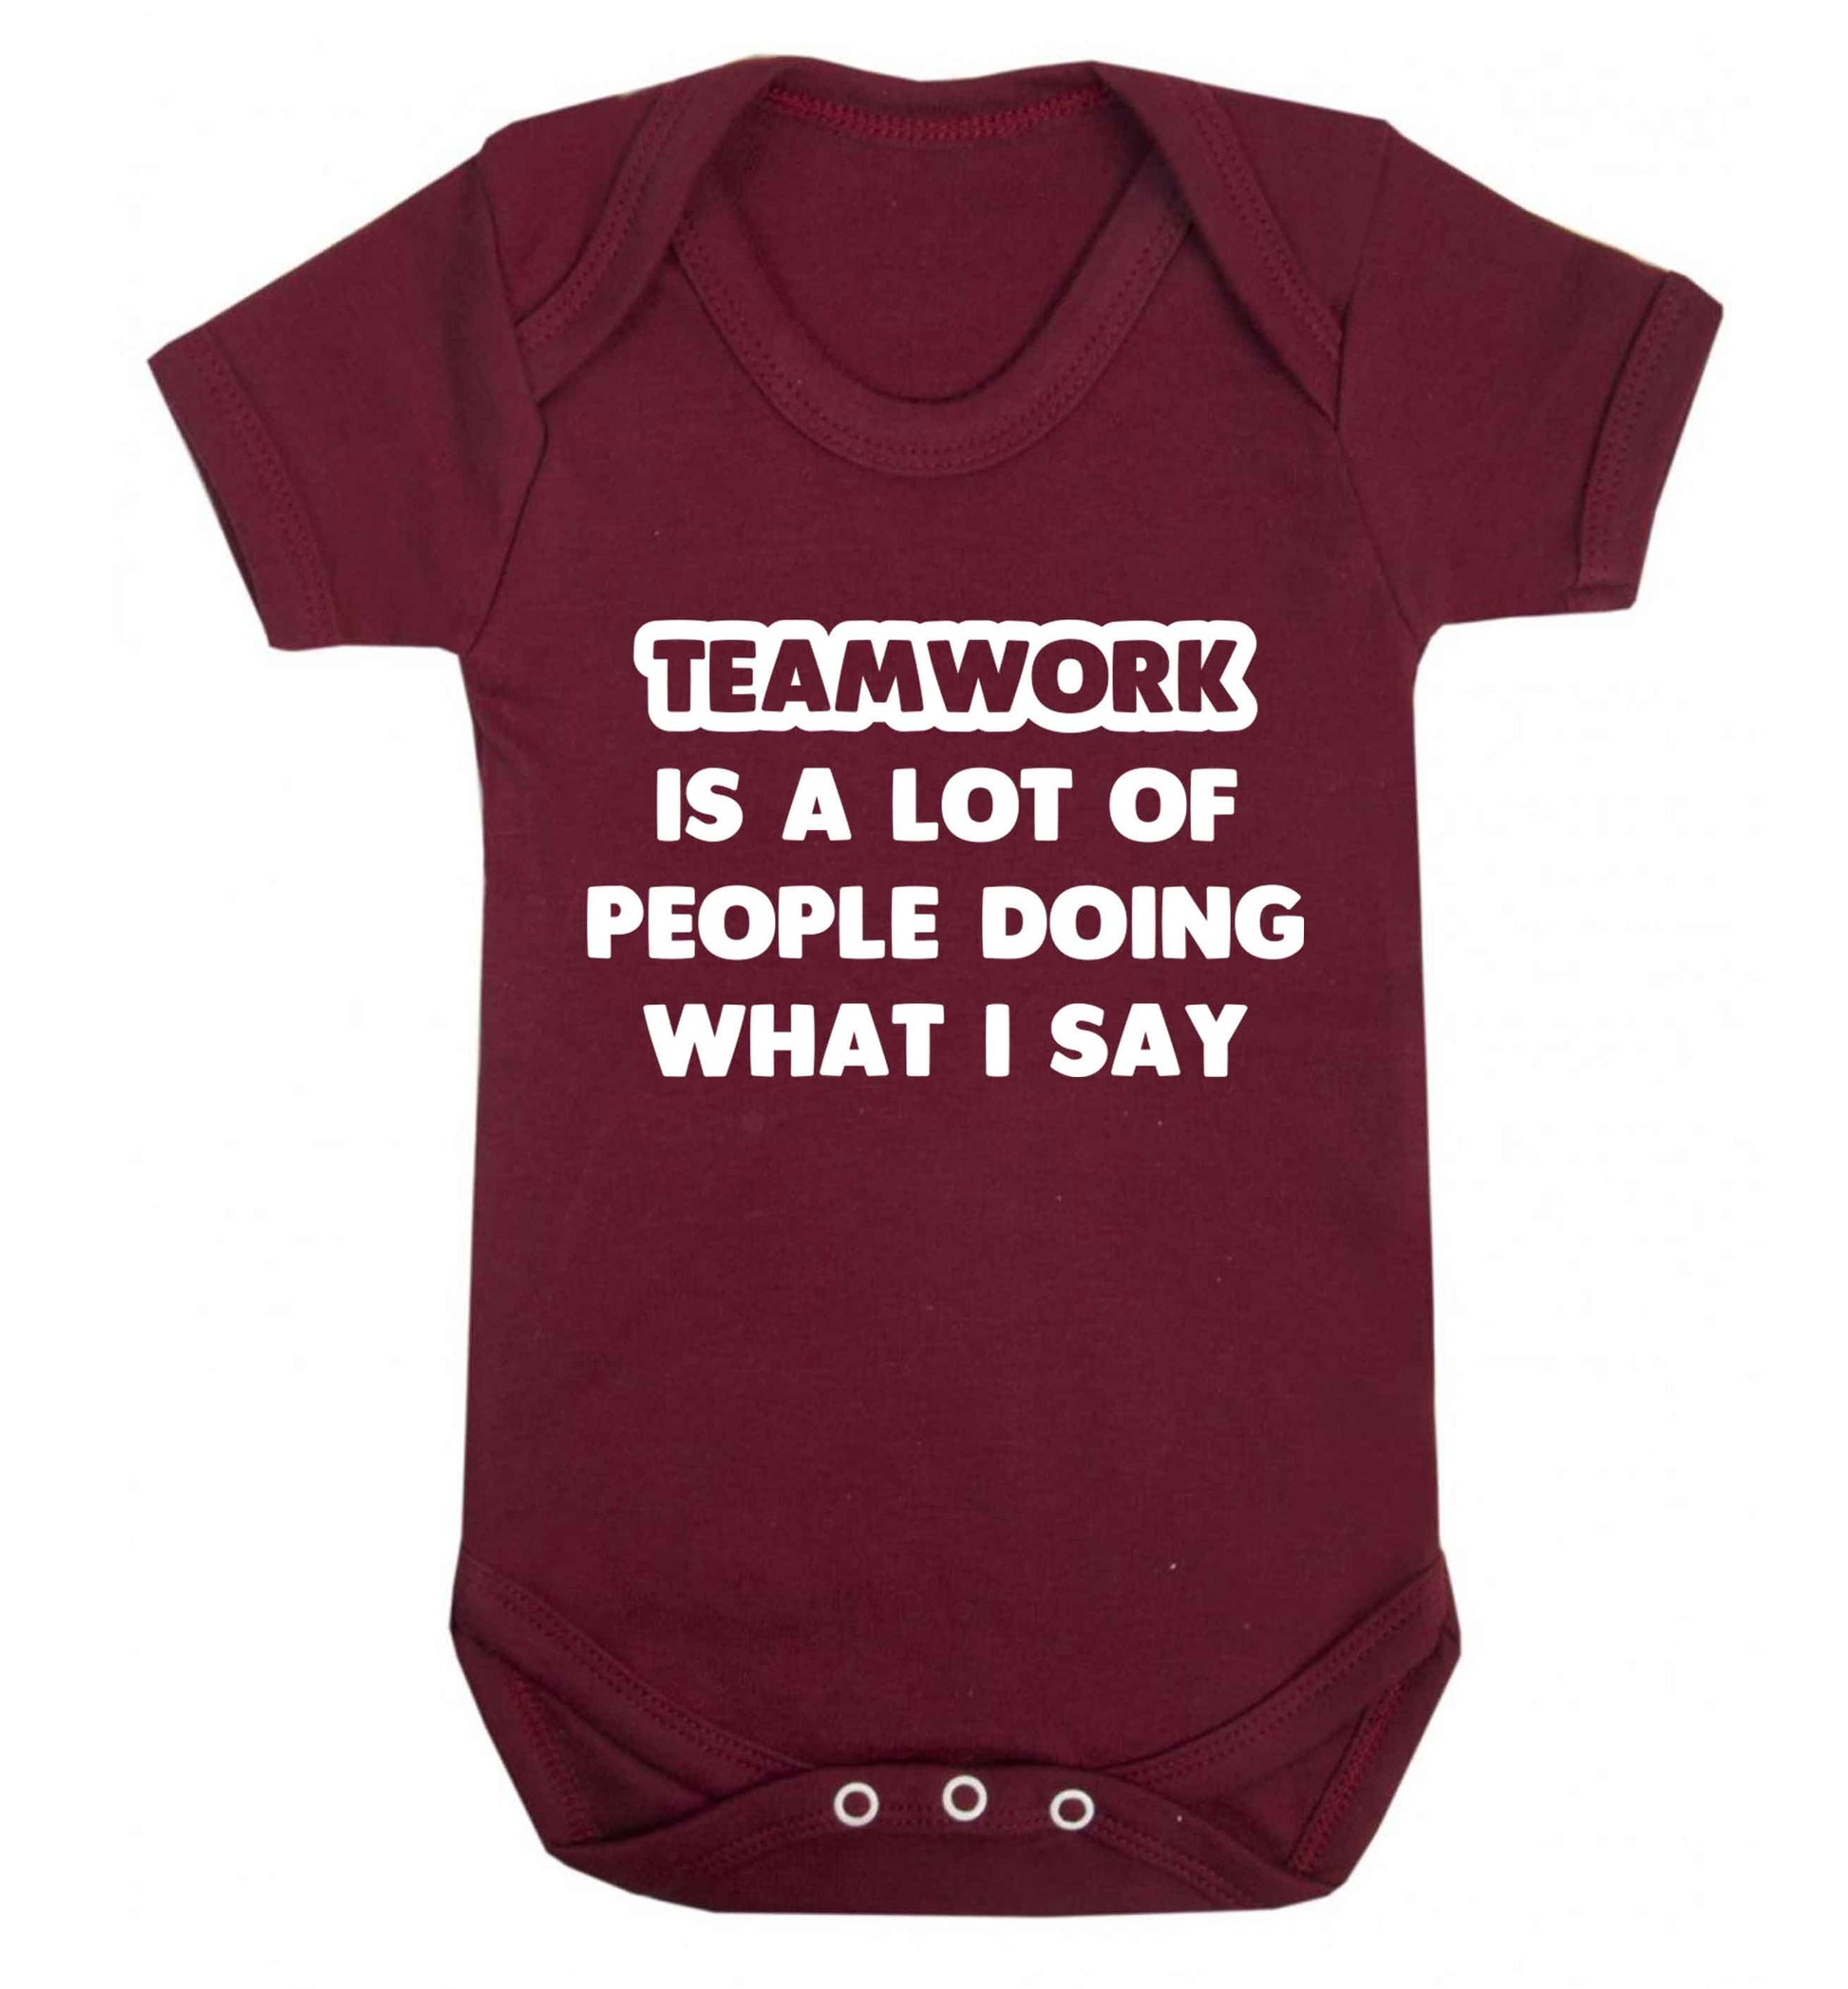 Teamwork is a lot of people doing what I say Baby Vest maroon 18-24 months